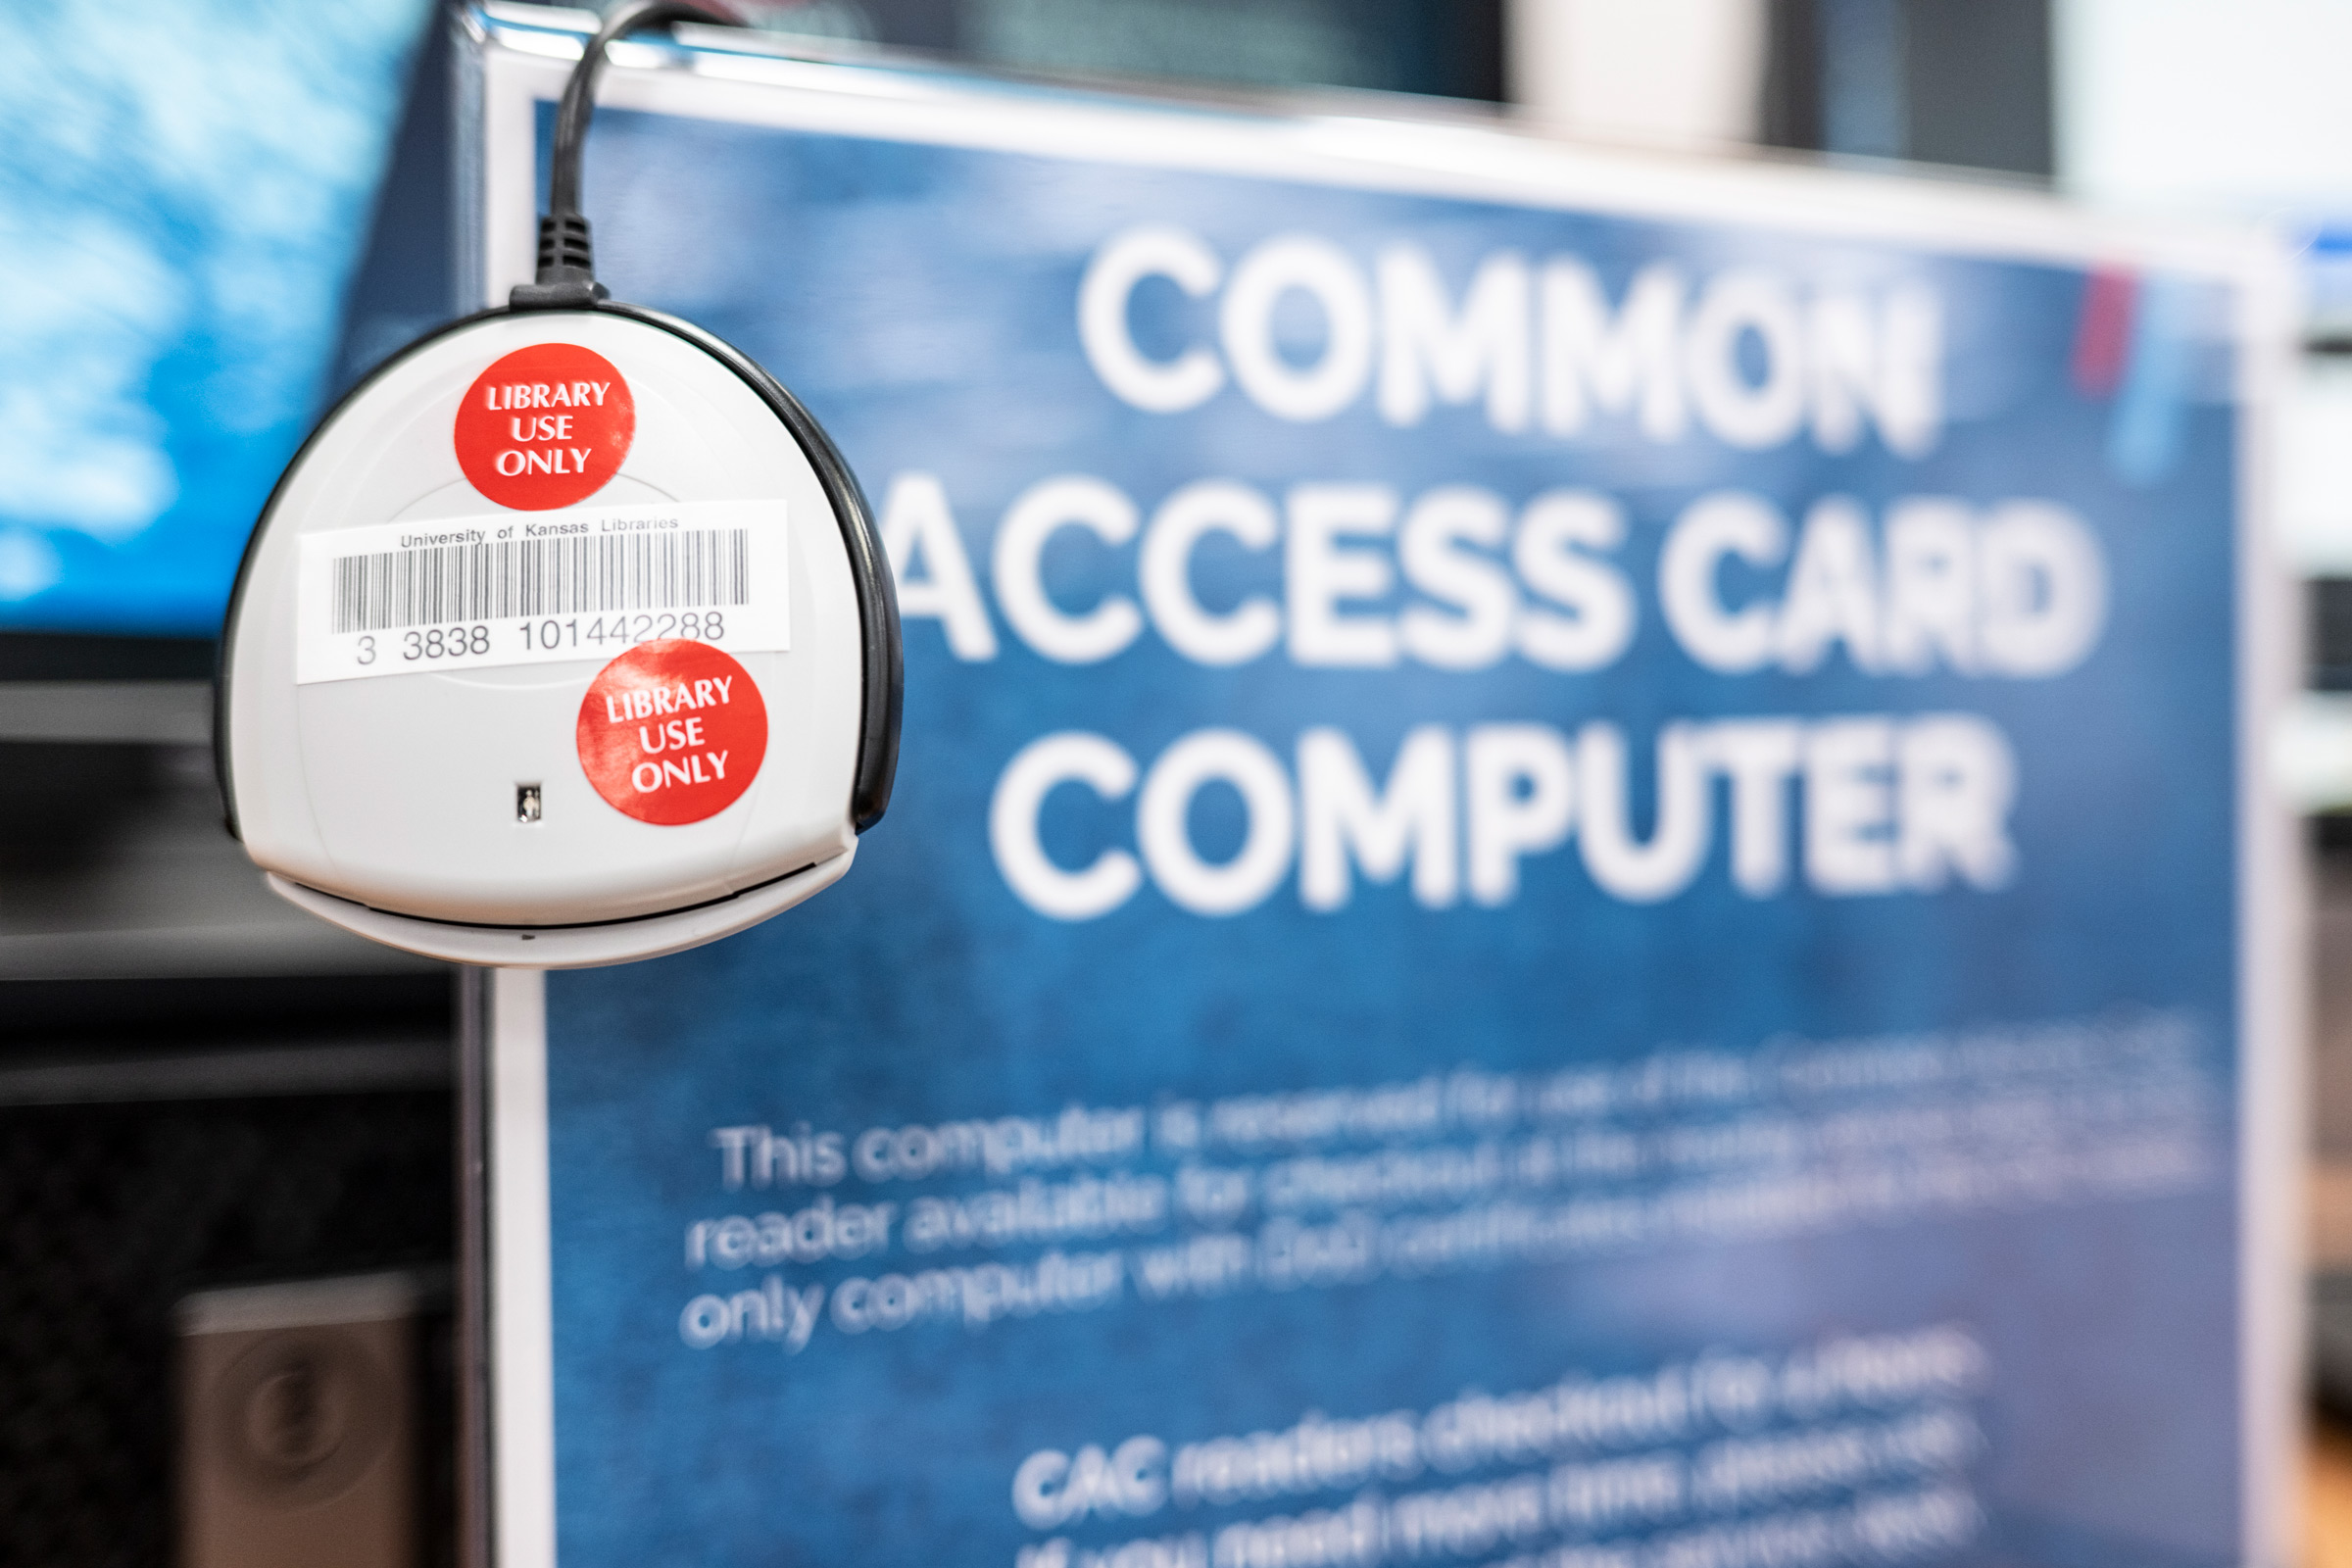 A Common Access Card reader hangs on the edge of the Common Access Card Computer signage in Watson Library.